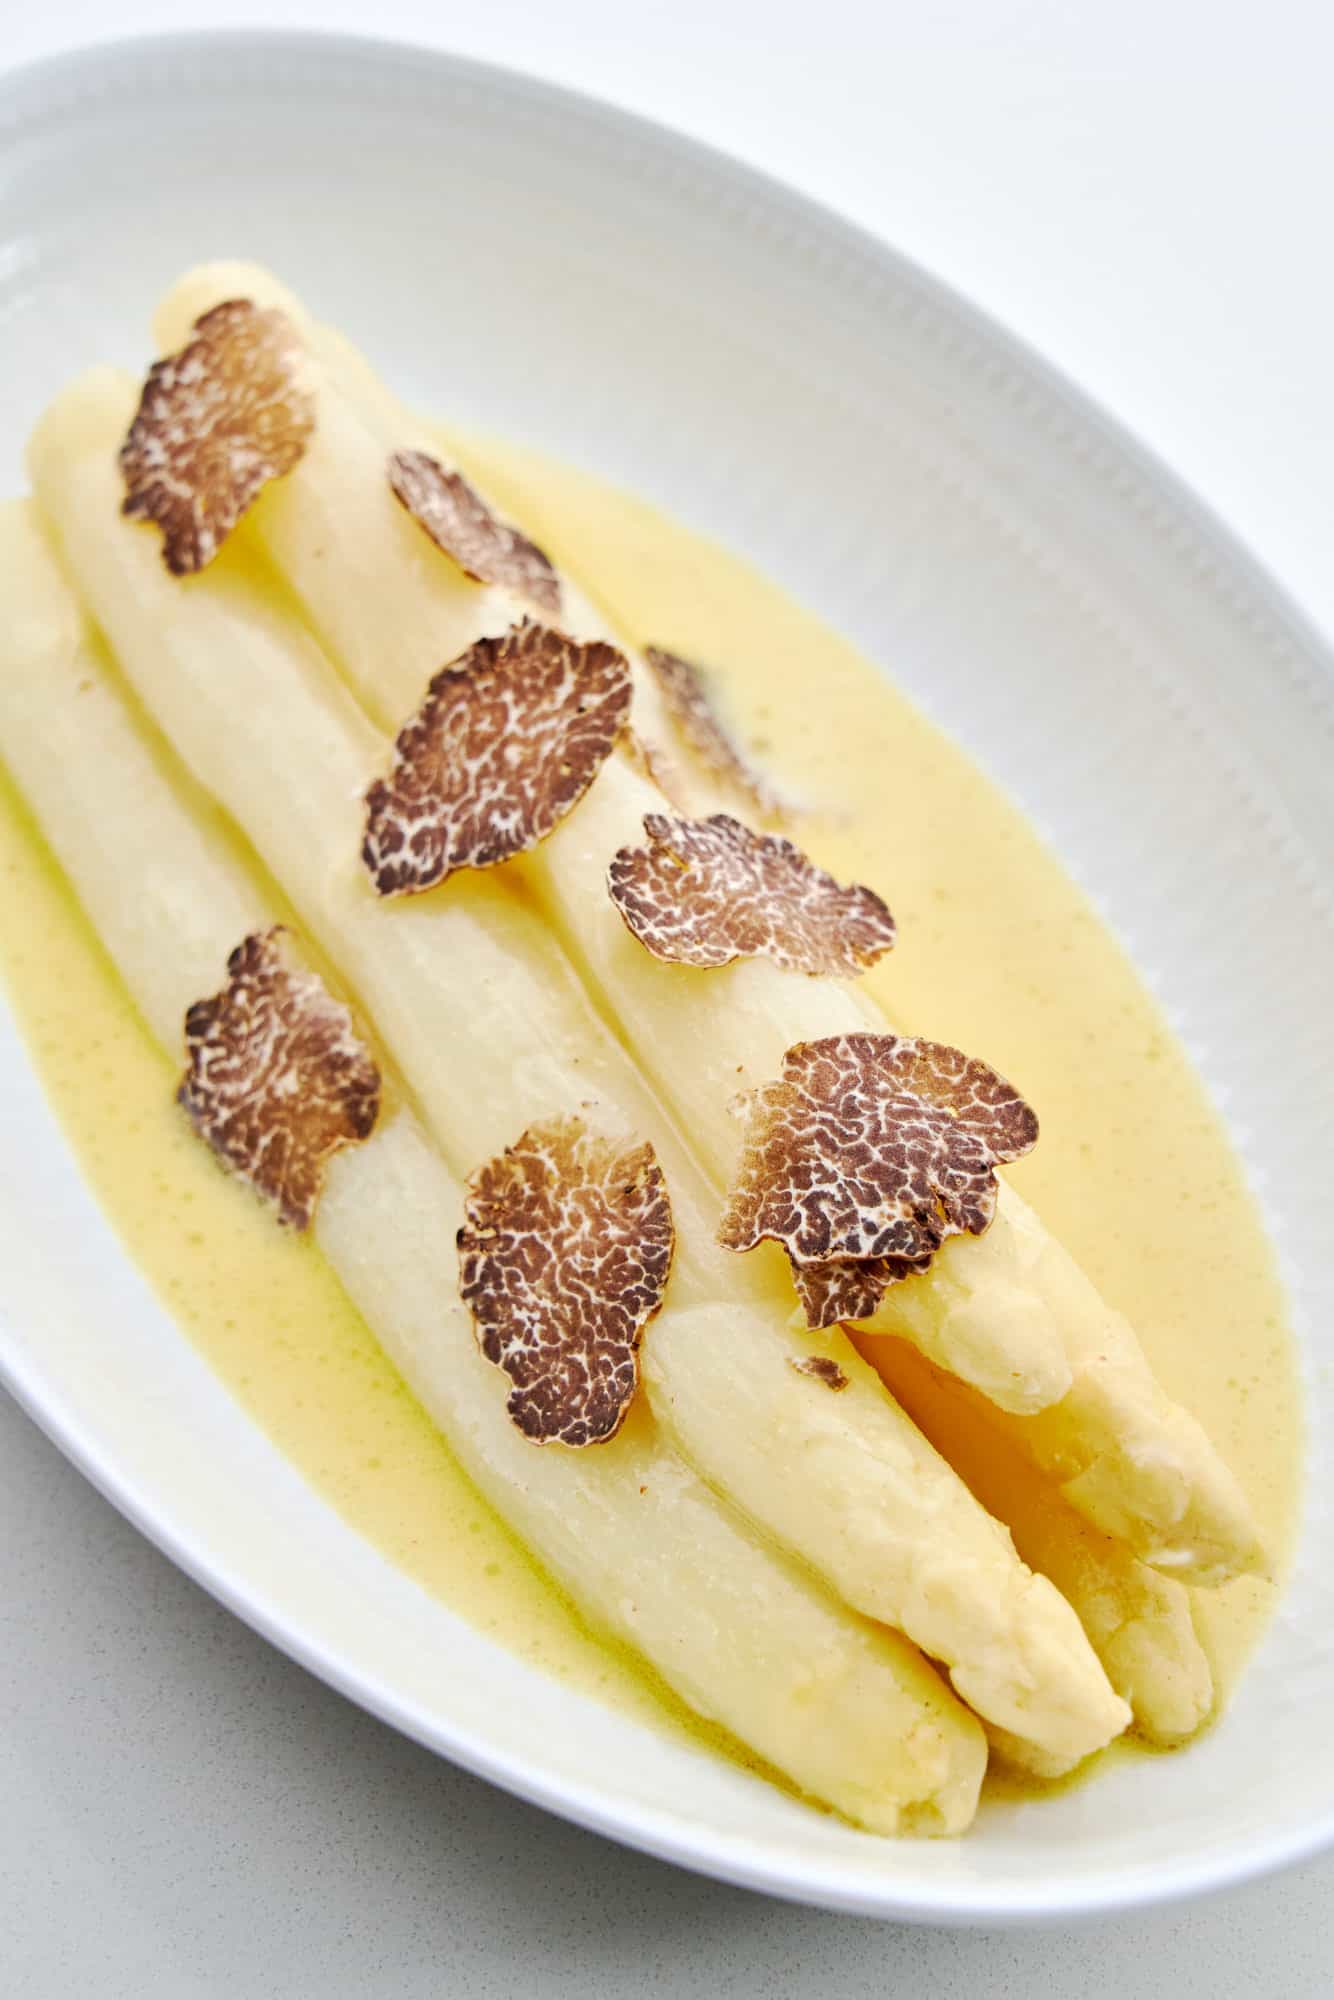 Aspragus marinated in a tangy mustard emulsion with shaved bianchetto truffles.